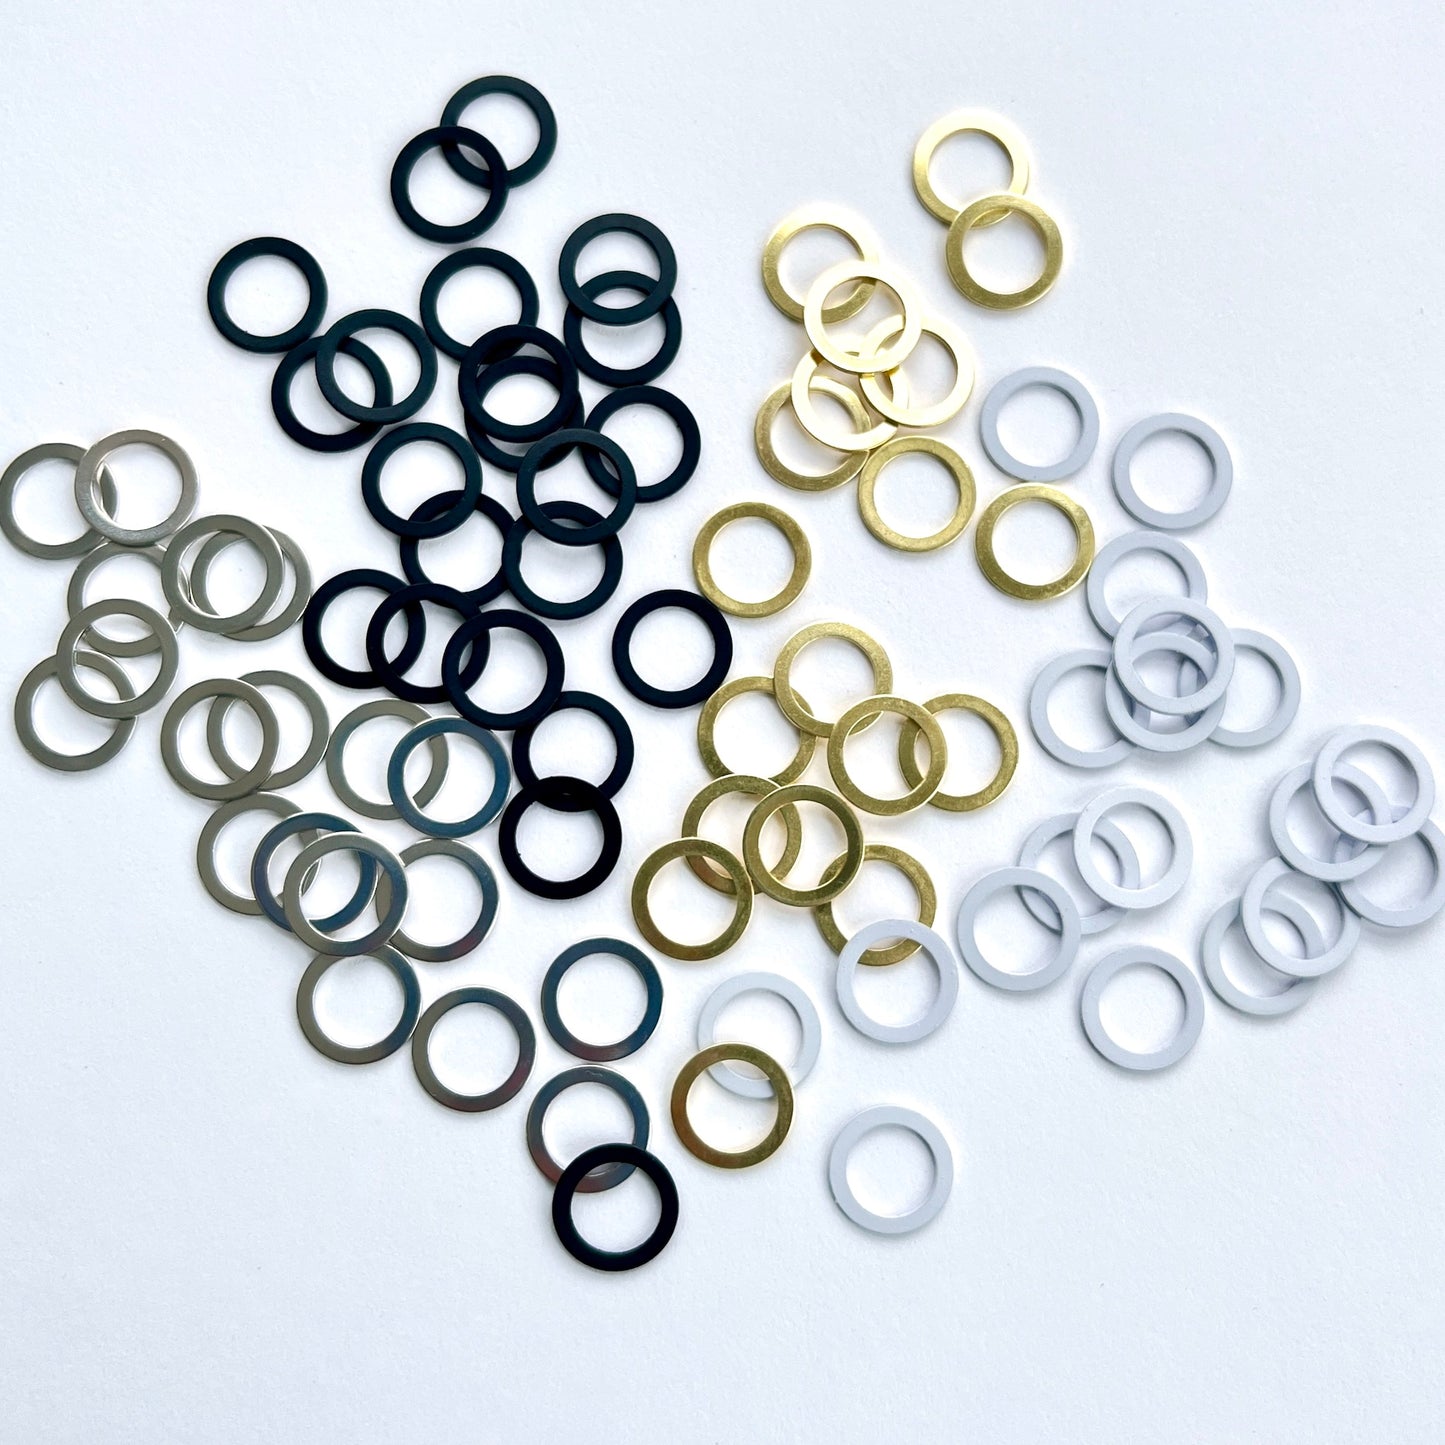 Small metal ring with 8mm internal diameter, Flat Metal Ring. For use within bra making and swimwear. Can be used to make adjustable straps too! Gold ring, white ring, silver ring, black ring